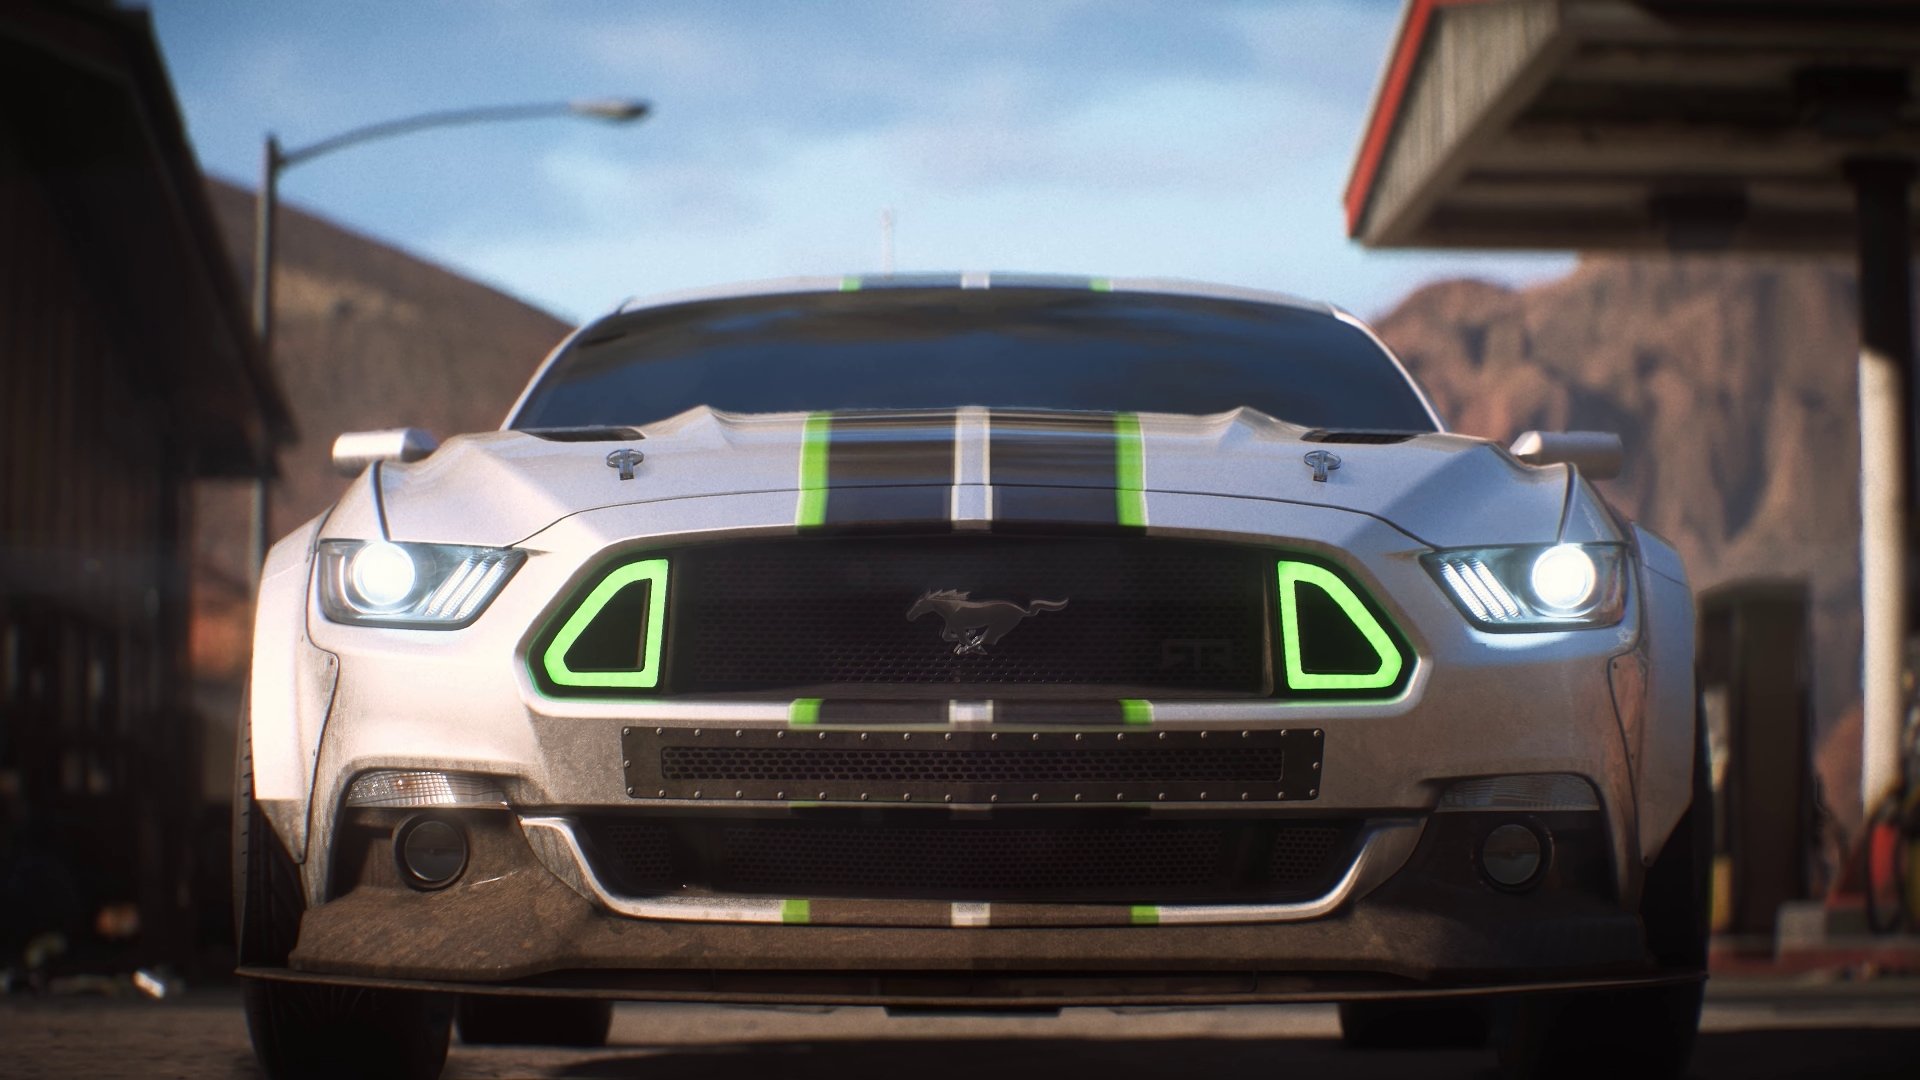 69 Need For Speed Payback Hd Wallpapers Background Images